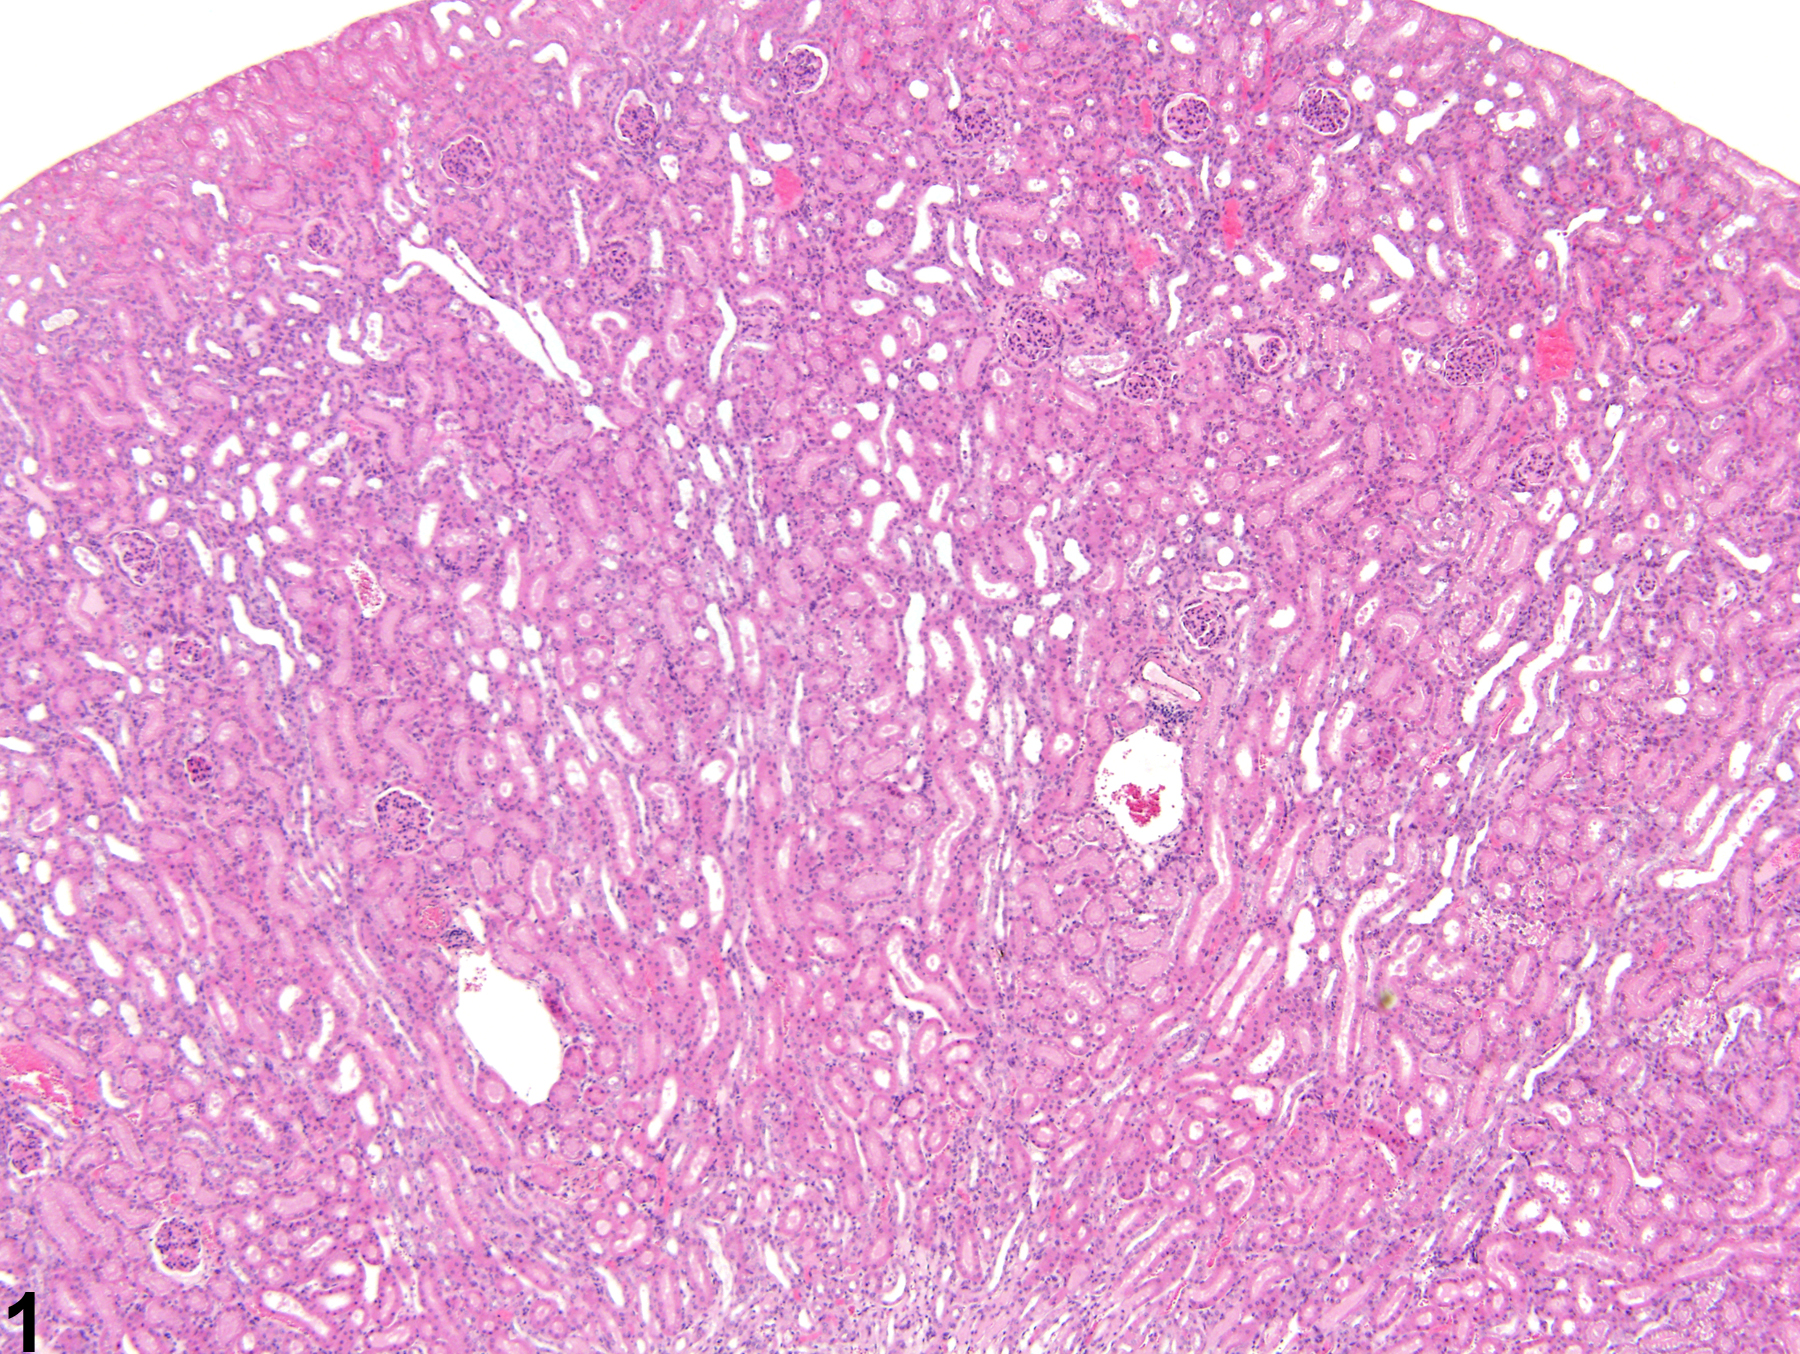 Image of renal tubule dilation in the kidney from a male B6C3F1 mouse in a chronic study